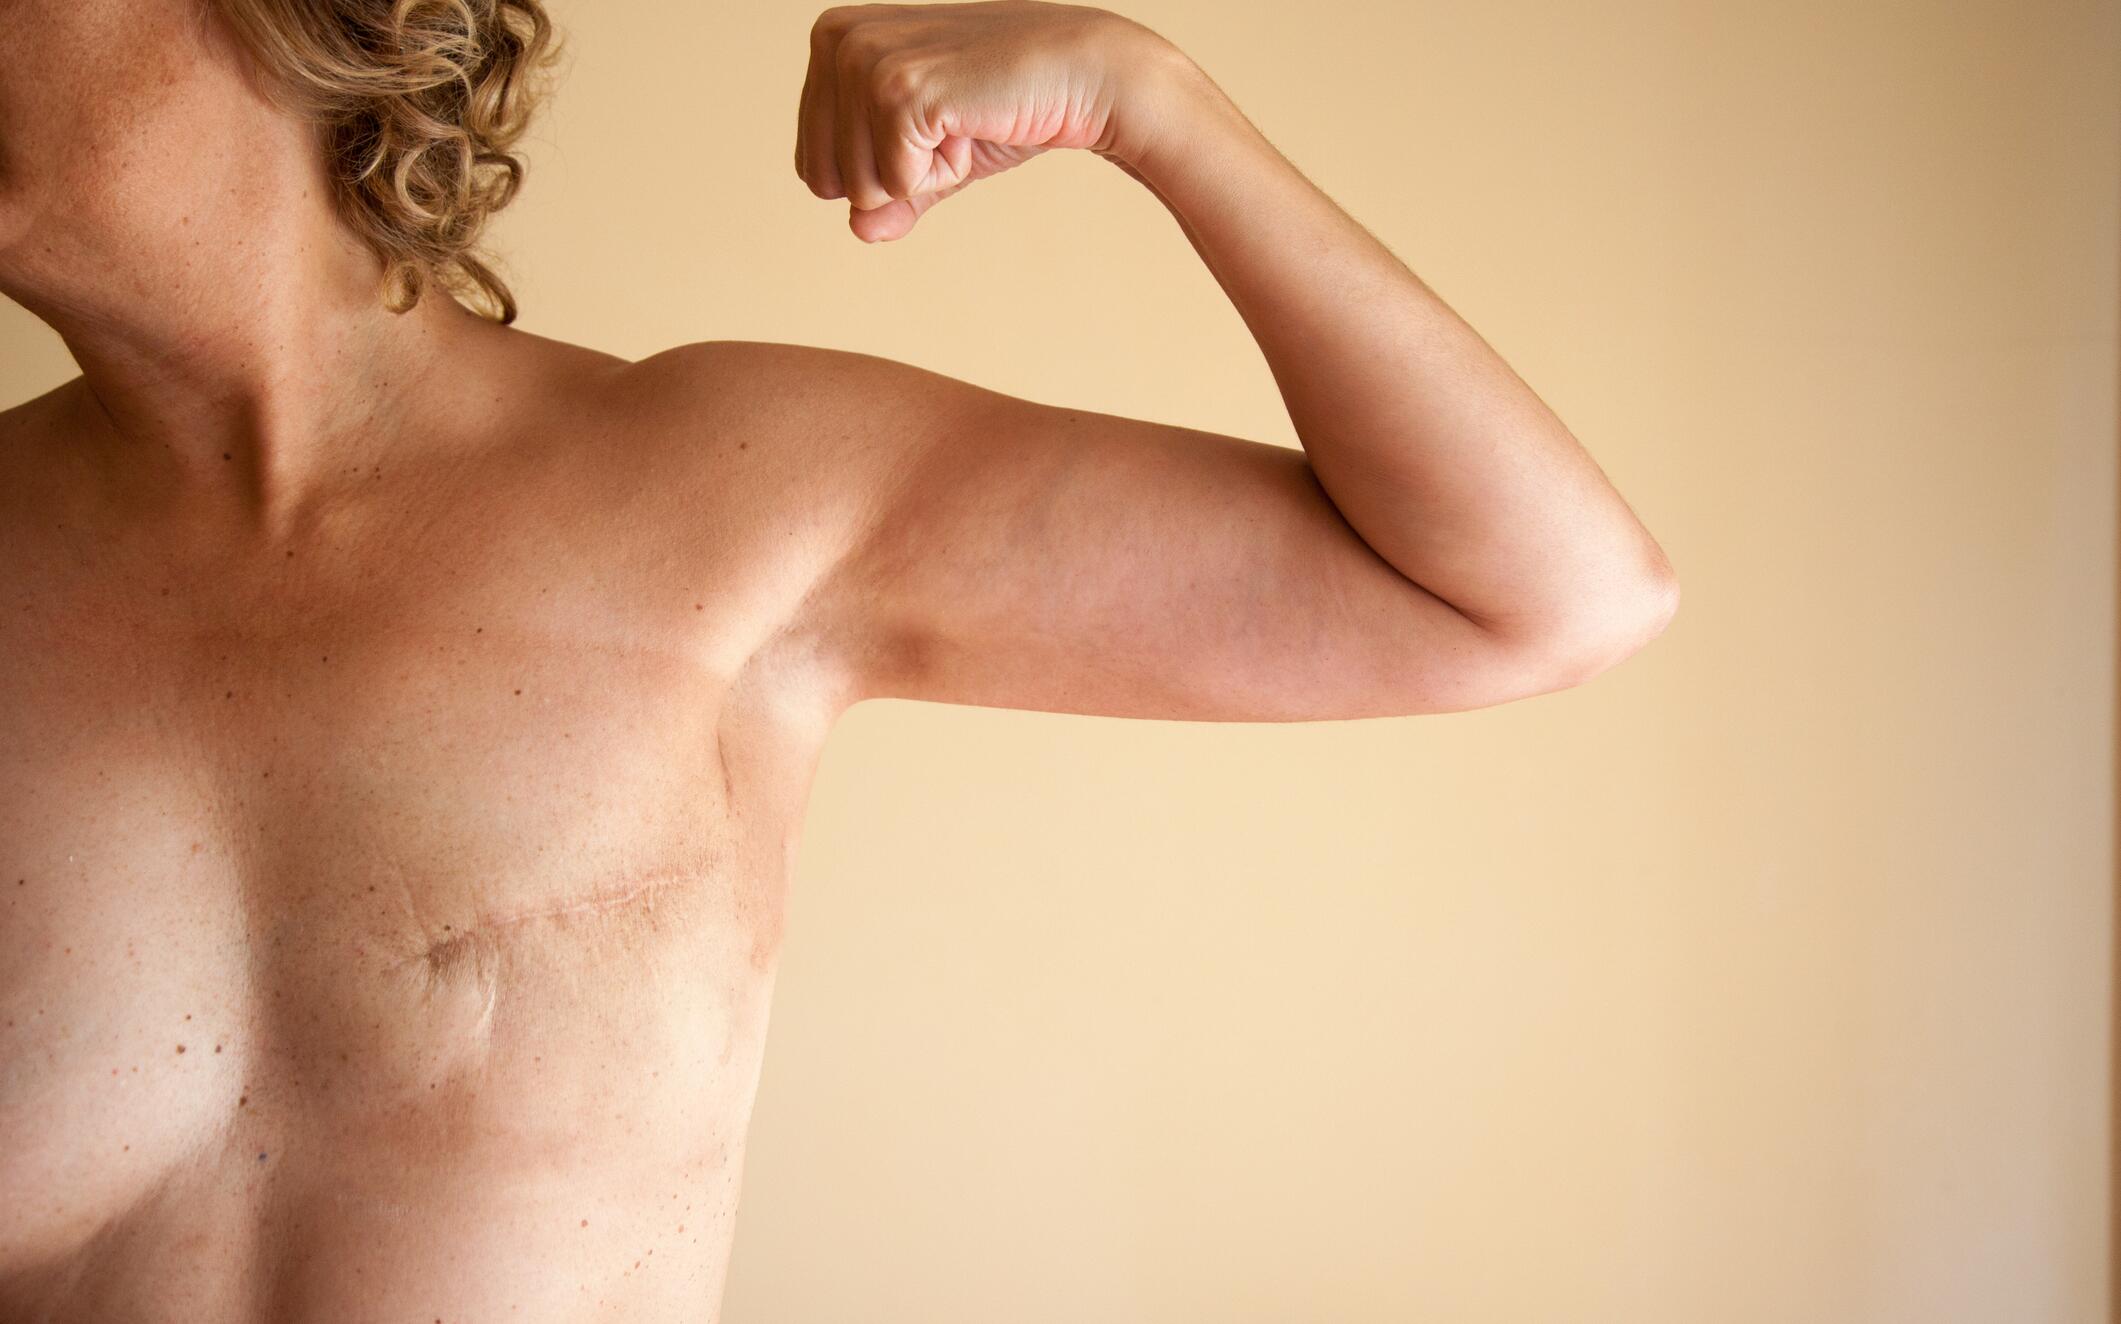 OG_VWOMAN_SHOWING_HER_MASTECTOMY_SCAR_FROM_HER_BREAST_CANCER_OPERATION_ISTOCK_2023